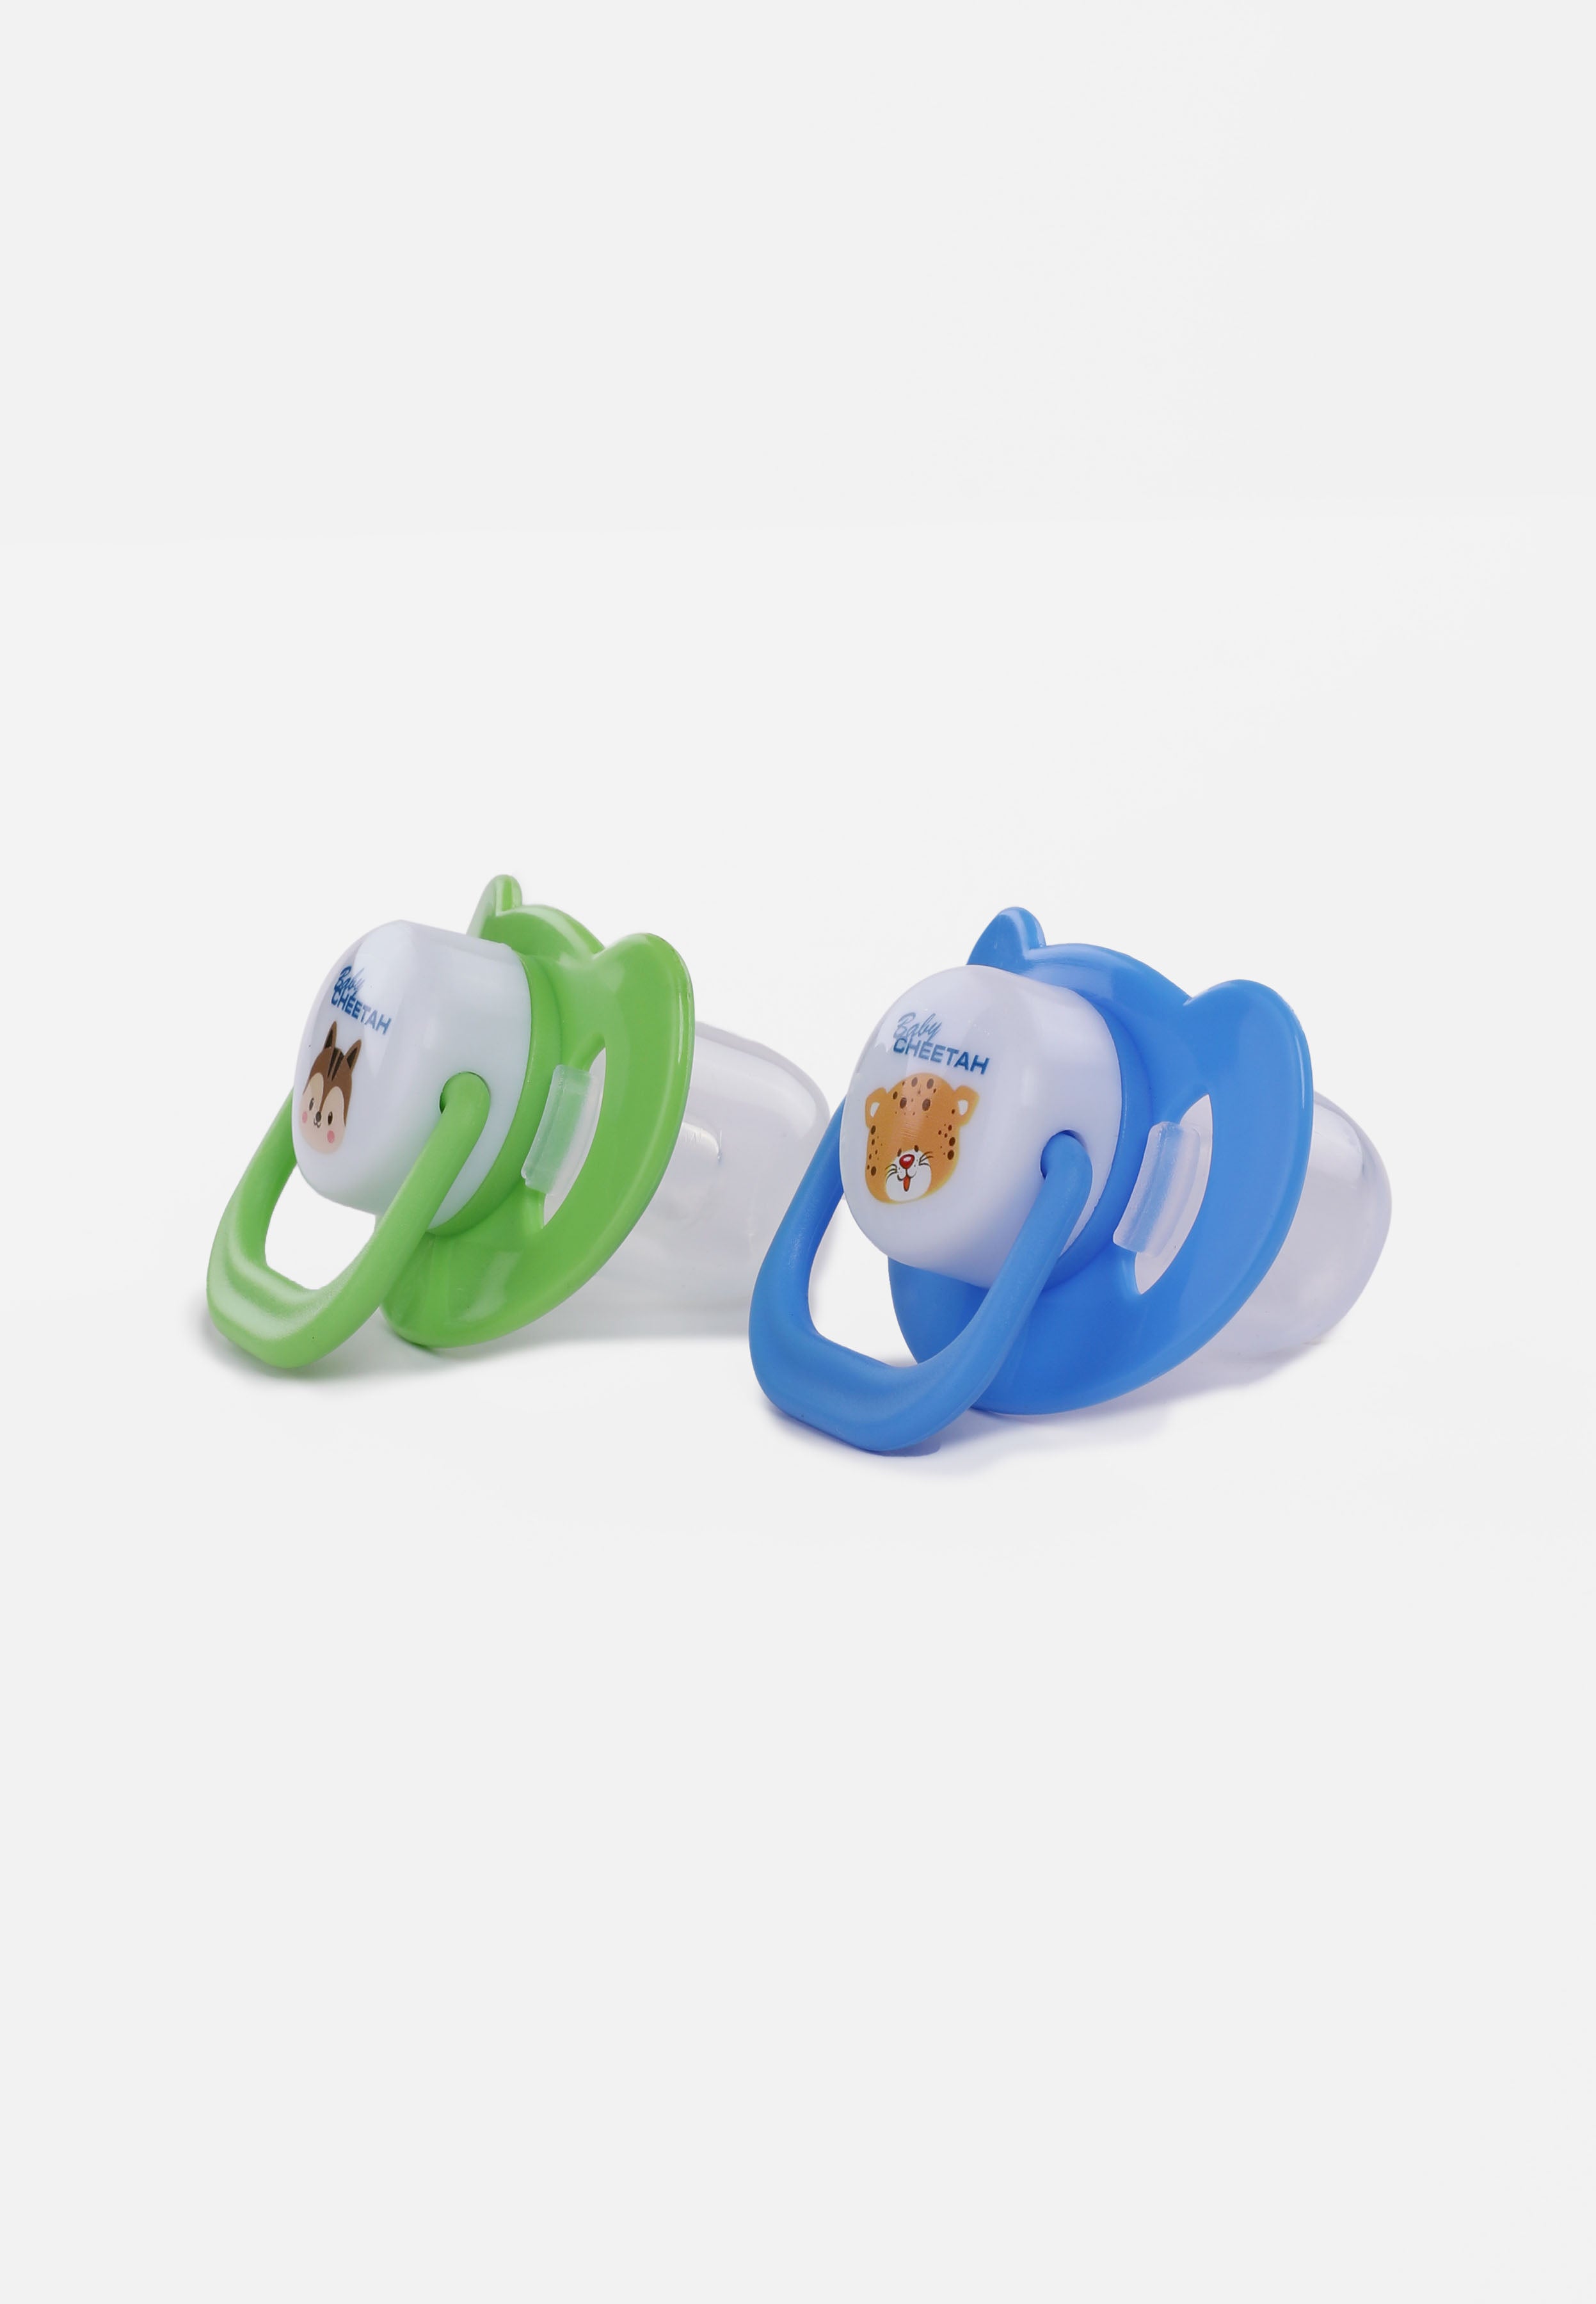 Baby Cheetah Soother with Case (2 IN 1) - Oval Teats (0-6M) - CBB-ST21100